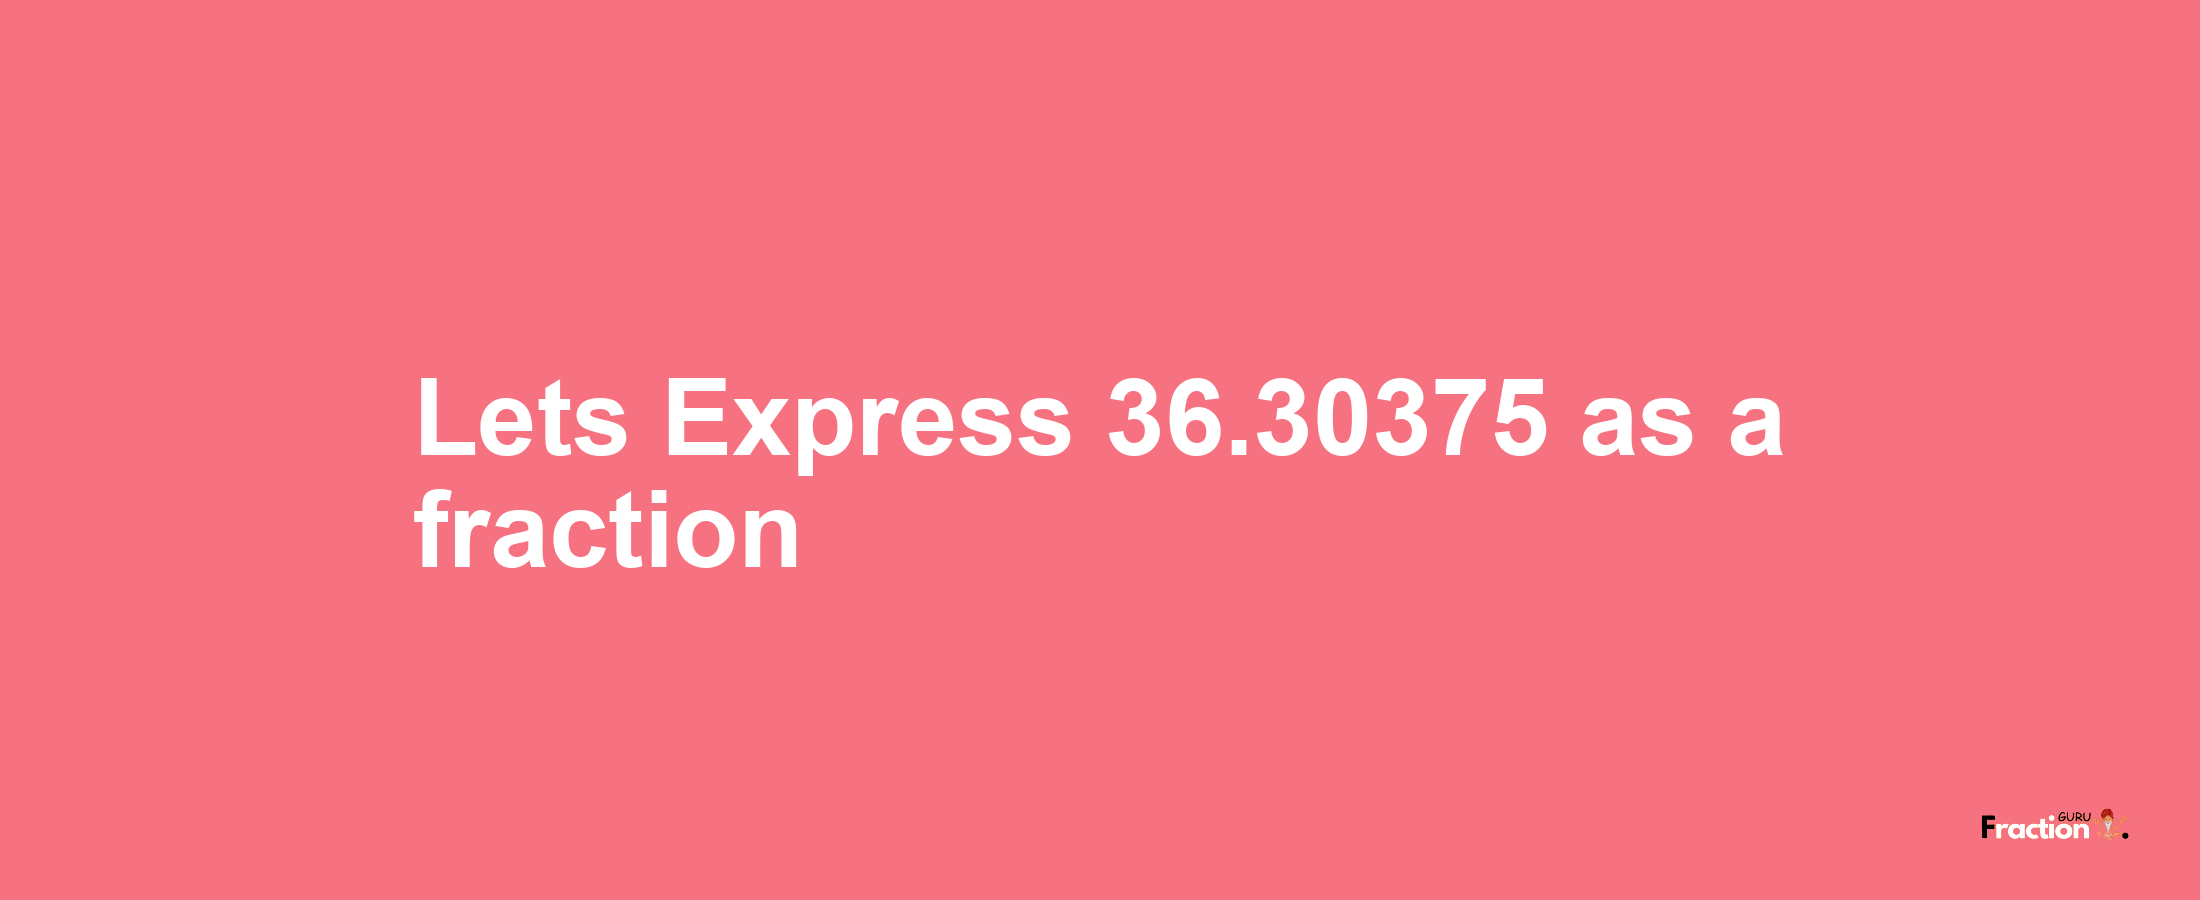 Lets Express 36.30375 as afraction